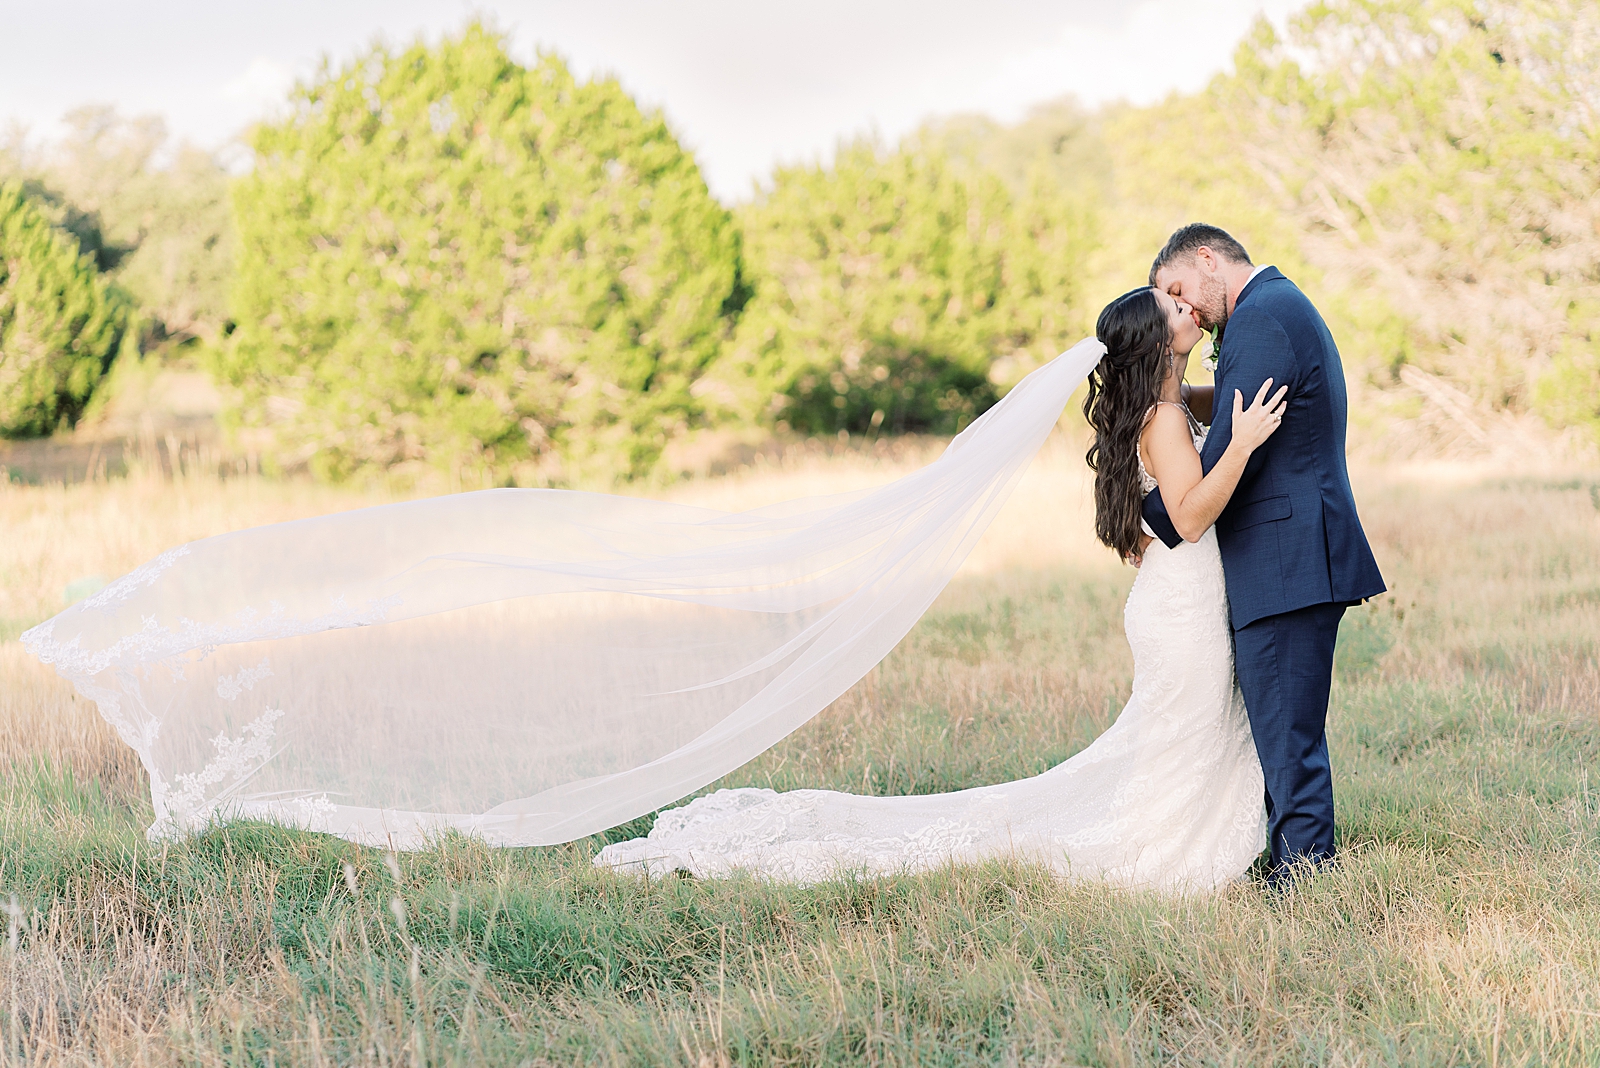 This navy, light gray, with pops of burgundy wedding day is some serious color palette inspo! In Dripping Springs, Texas at Saddle Creek Weddings, this day was full of elegance, fun and thoughtful details. Click through to see all the pretty! #weddingdayinspiration #dustybluewedding #austintexaswedding #hillcountrywedding #veiltoss 